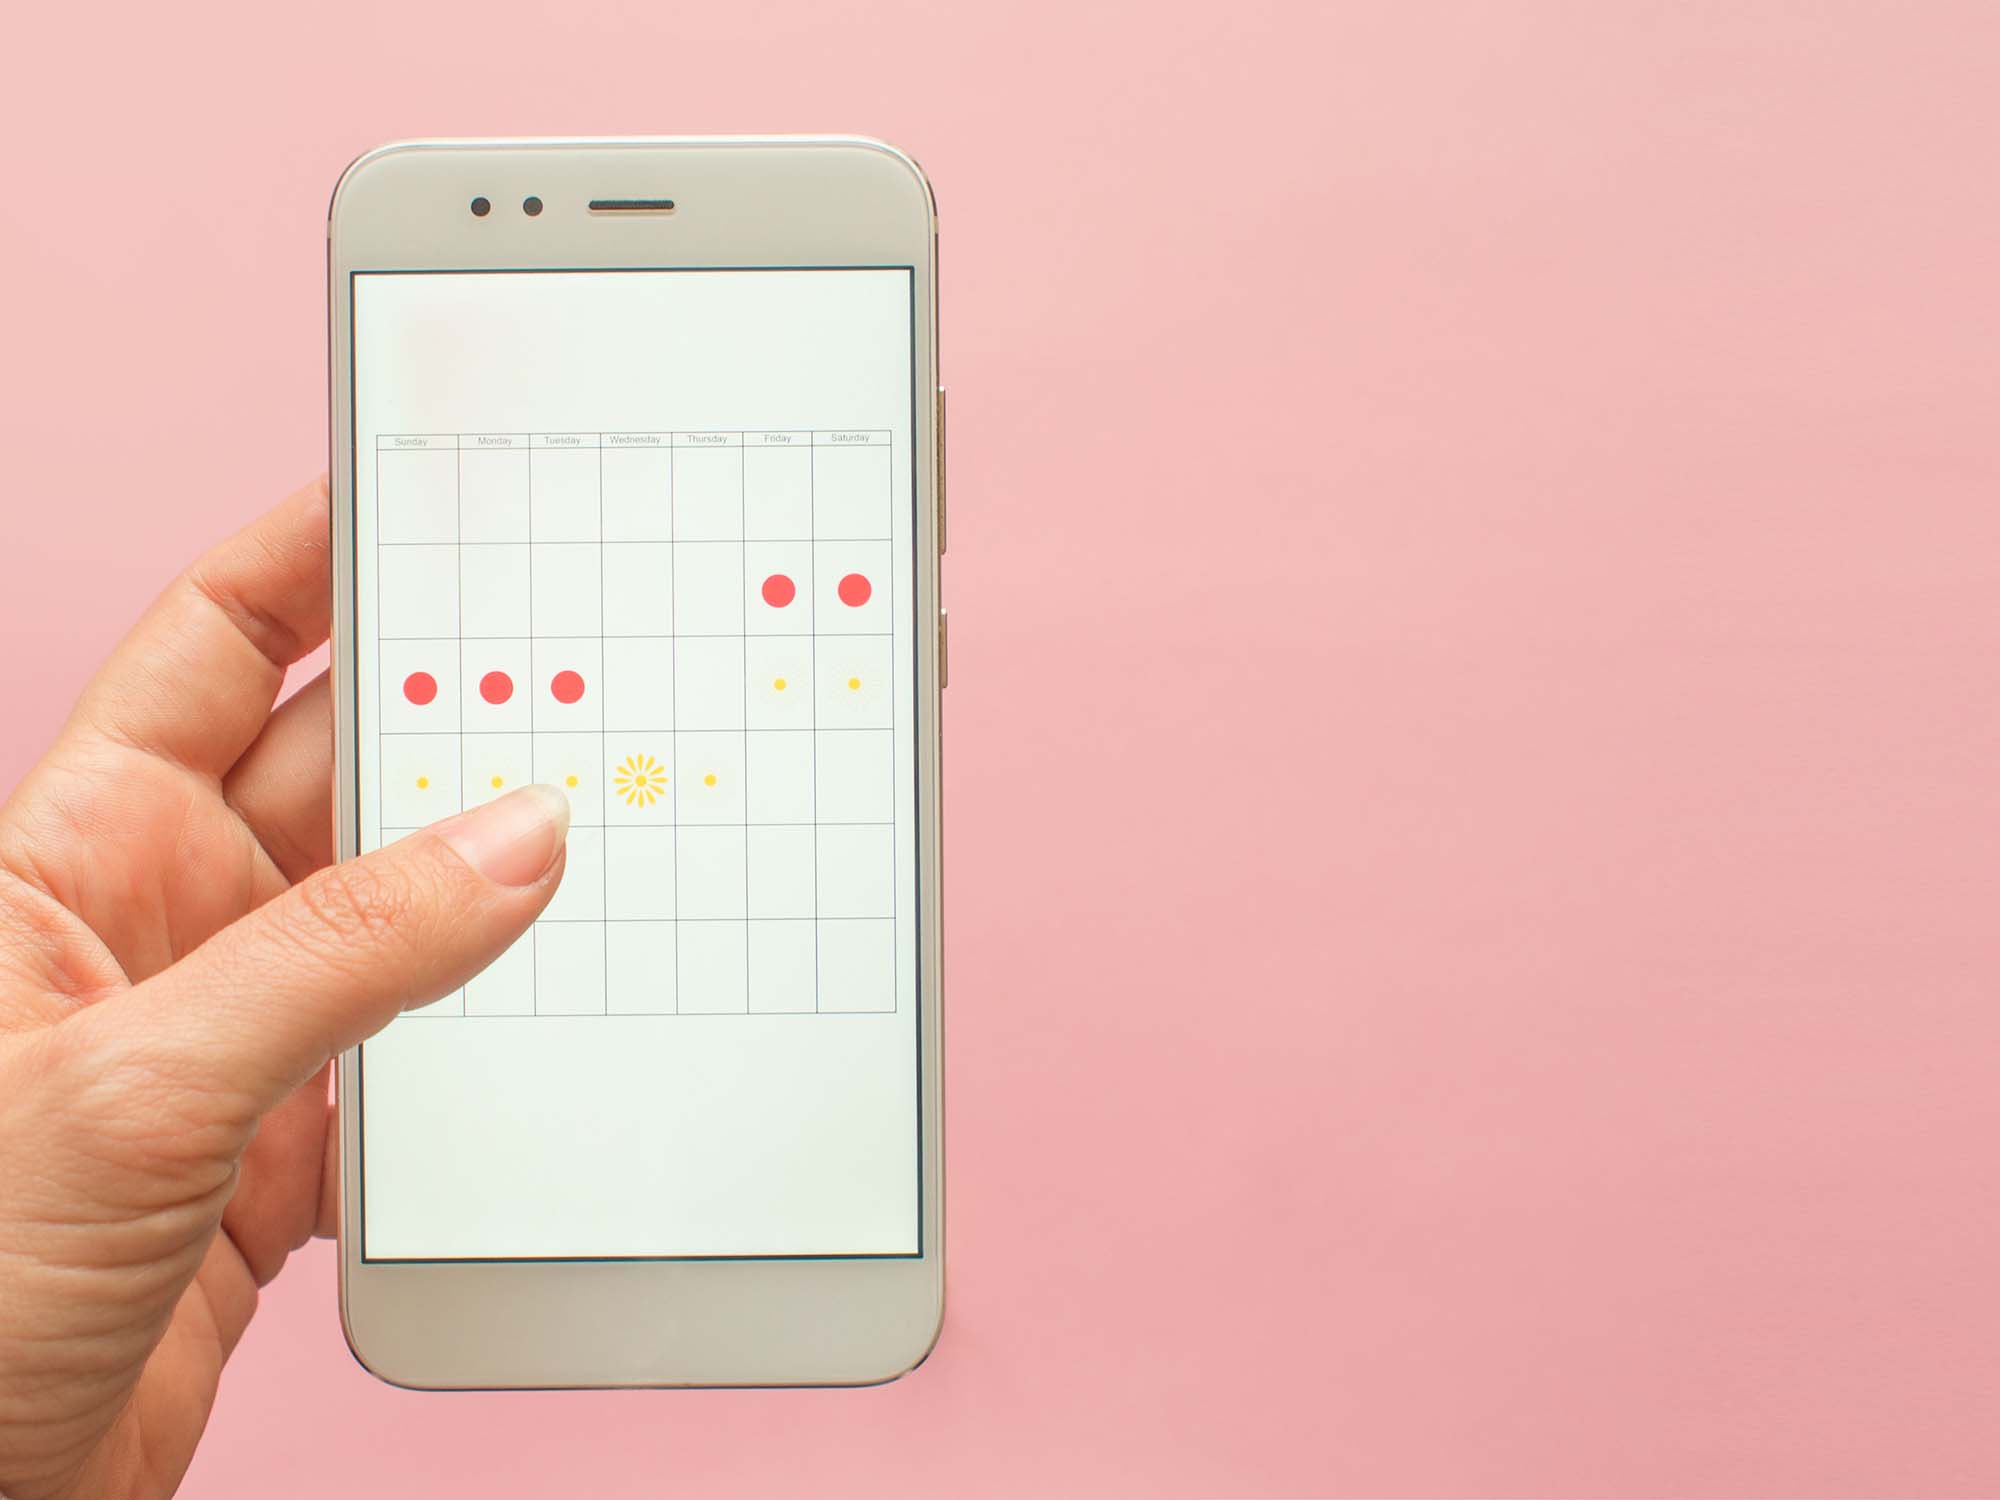 Fertility apps are a pain in the uterus. Here’s how to make them better.